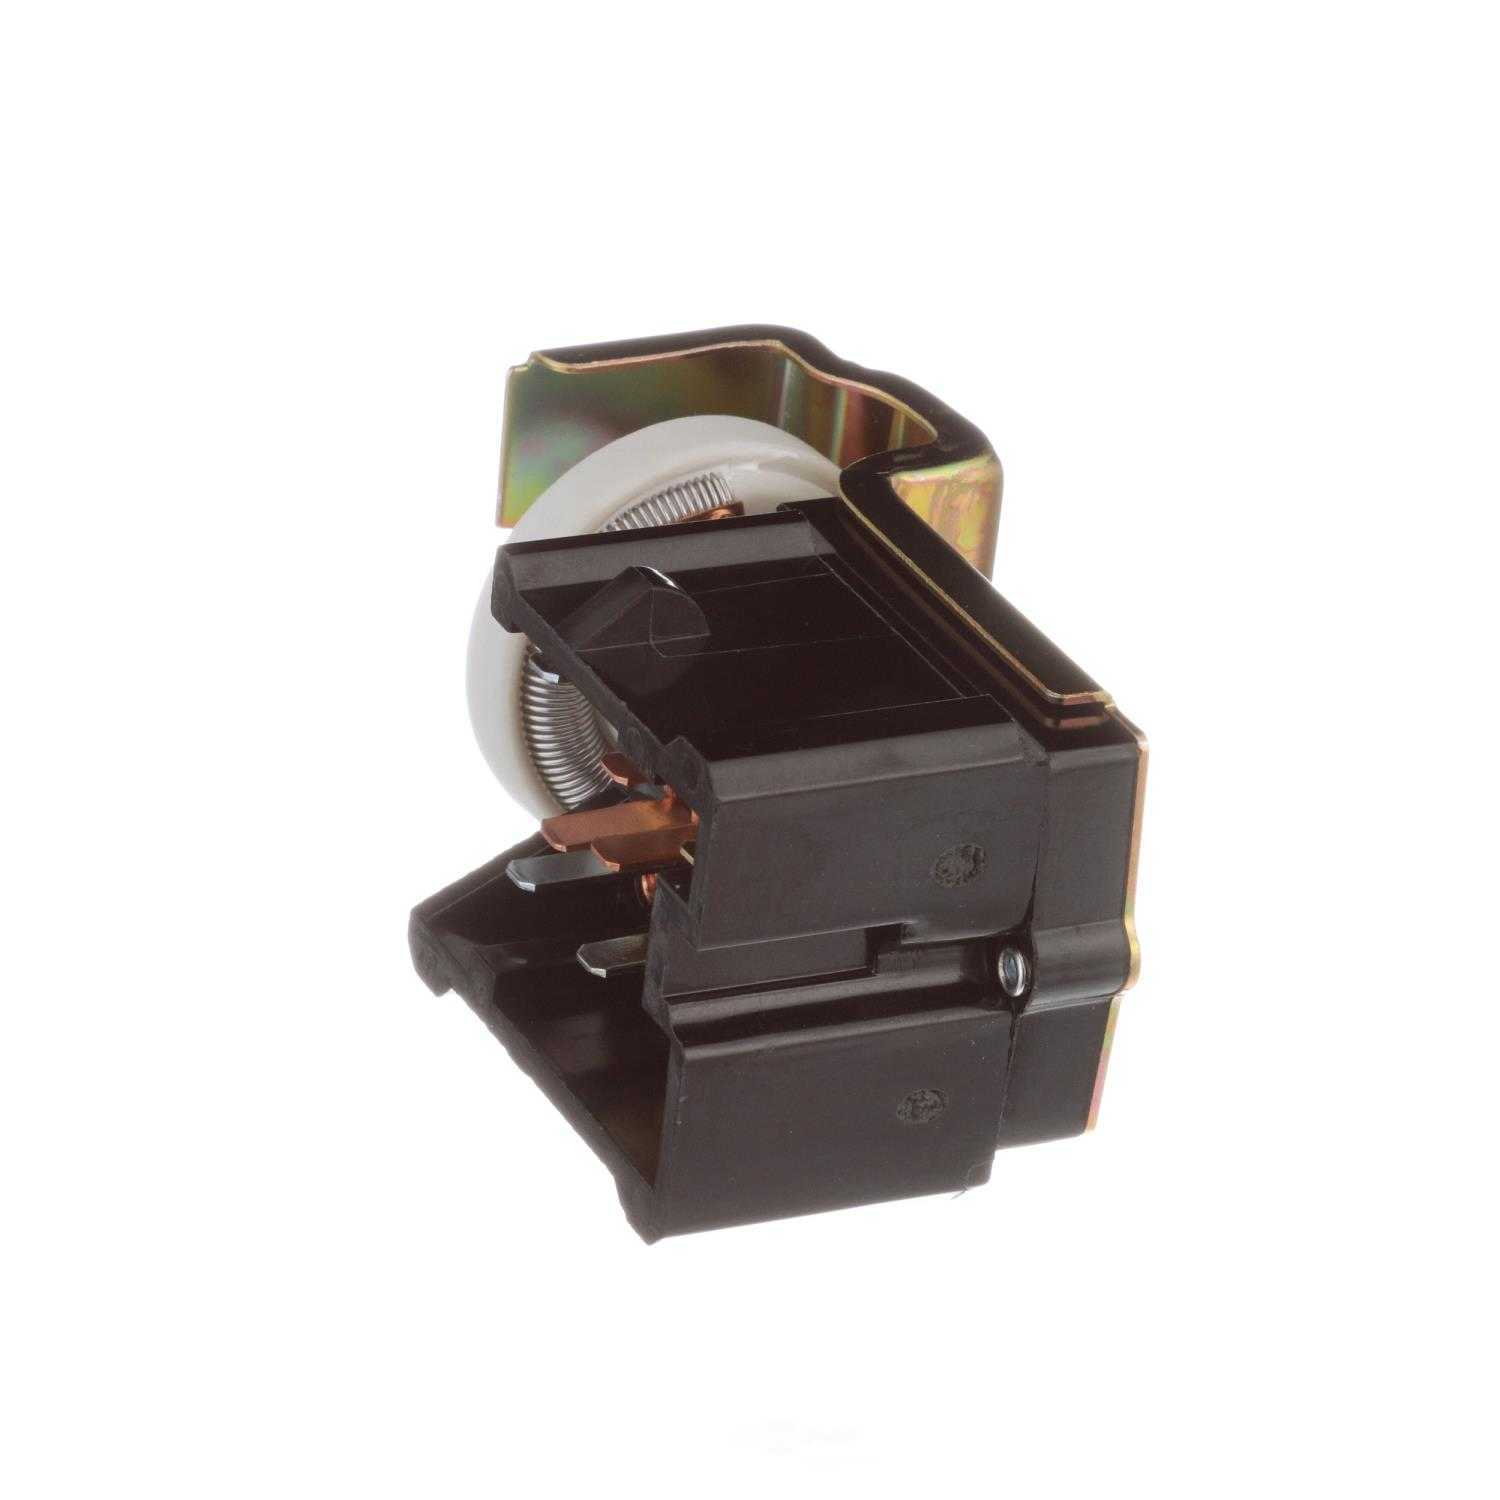 STANDARD MOTOR PRODUCTS - Instrument Panel Dimmer Switch - STA DS-268